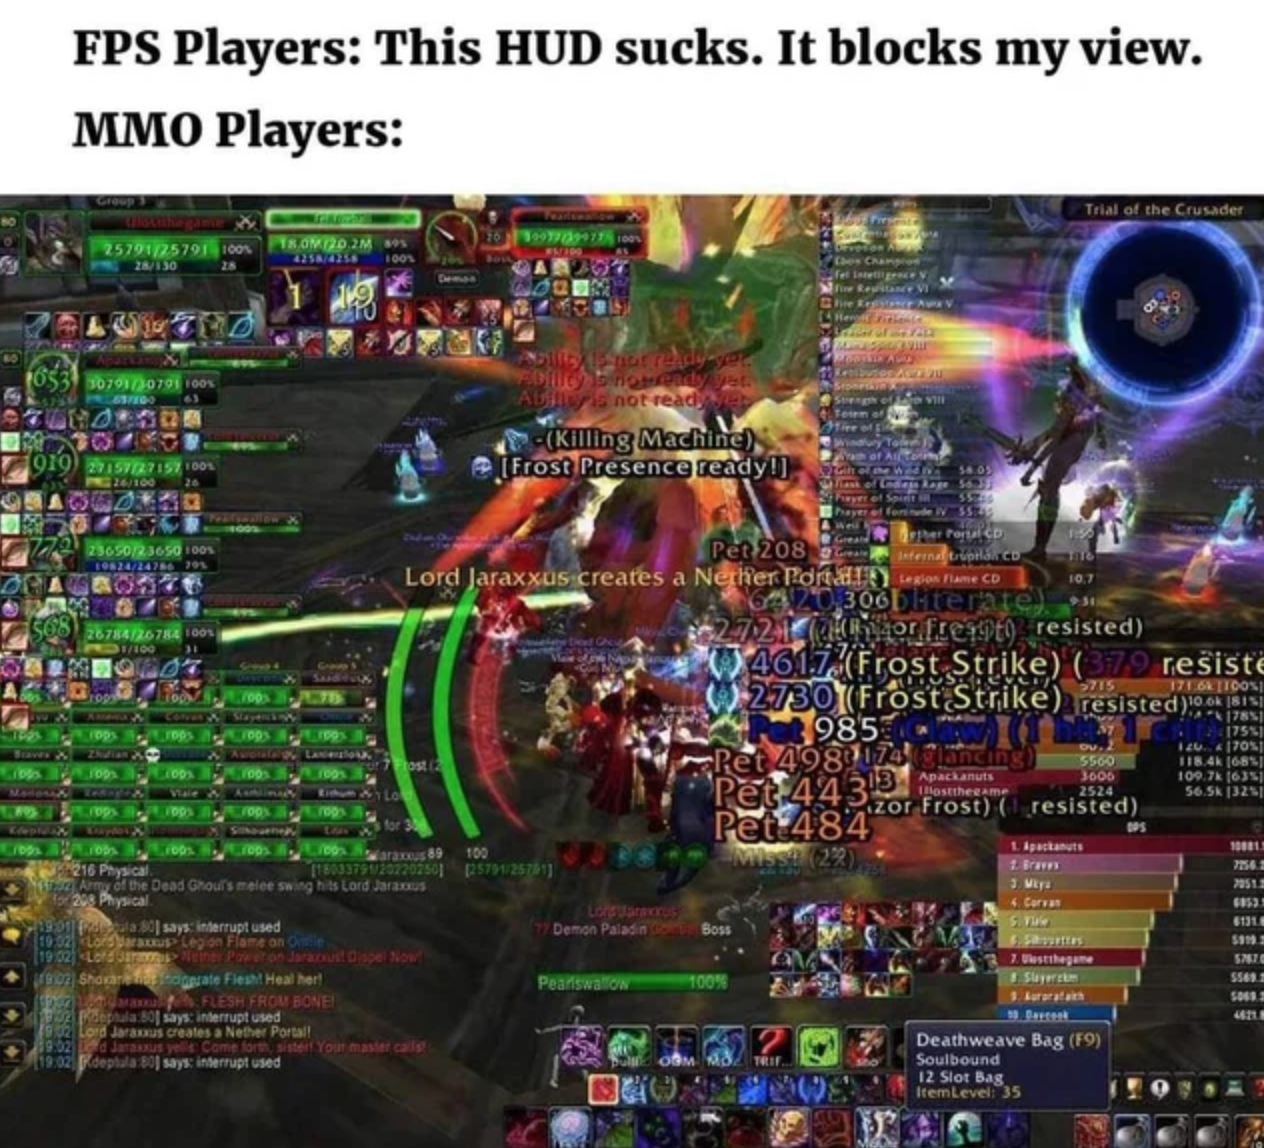 funny gaming memes  - fps players vs mmo players - Fps Players This Hud sucks. It blocks It blocks my view. Mmo Players Group Trial of the Crusader 99971034771001 2579125791100 28130 18.01 20,2M 895 1001 Ches Change Telle Rosal 30701030791 100 Aty is not 